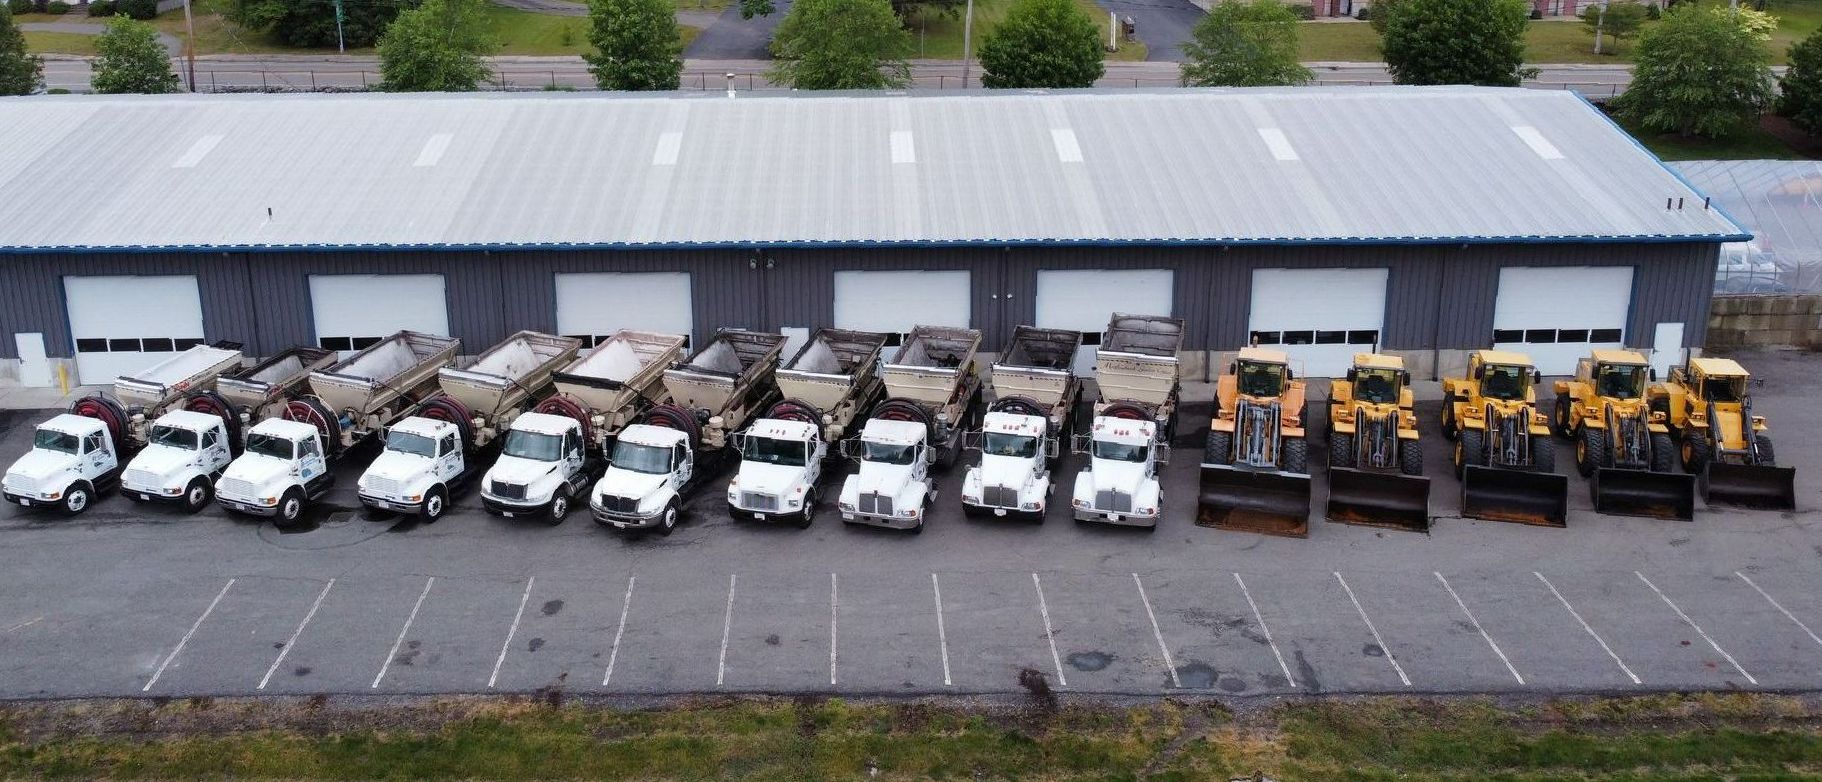 fleet of material blow trucks, hanson ma mulch installers, driveway sealcoating experts